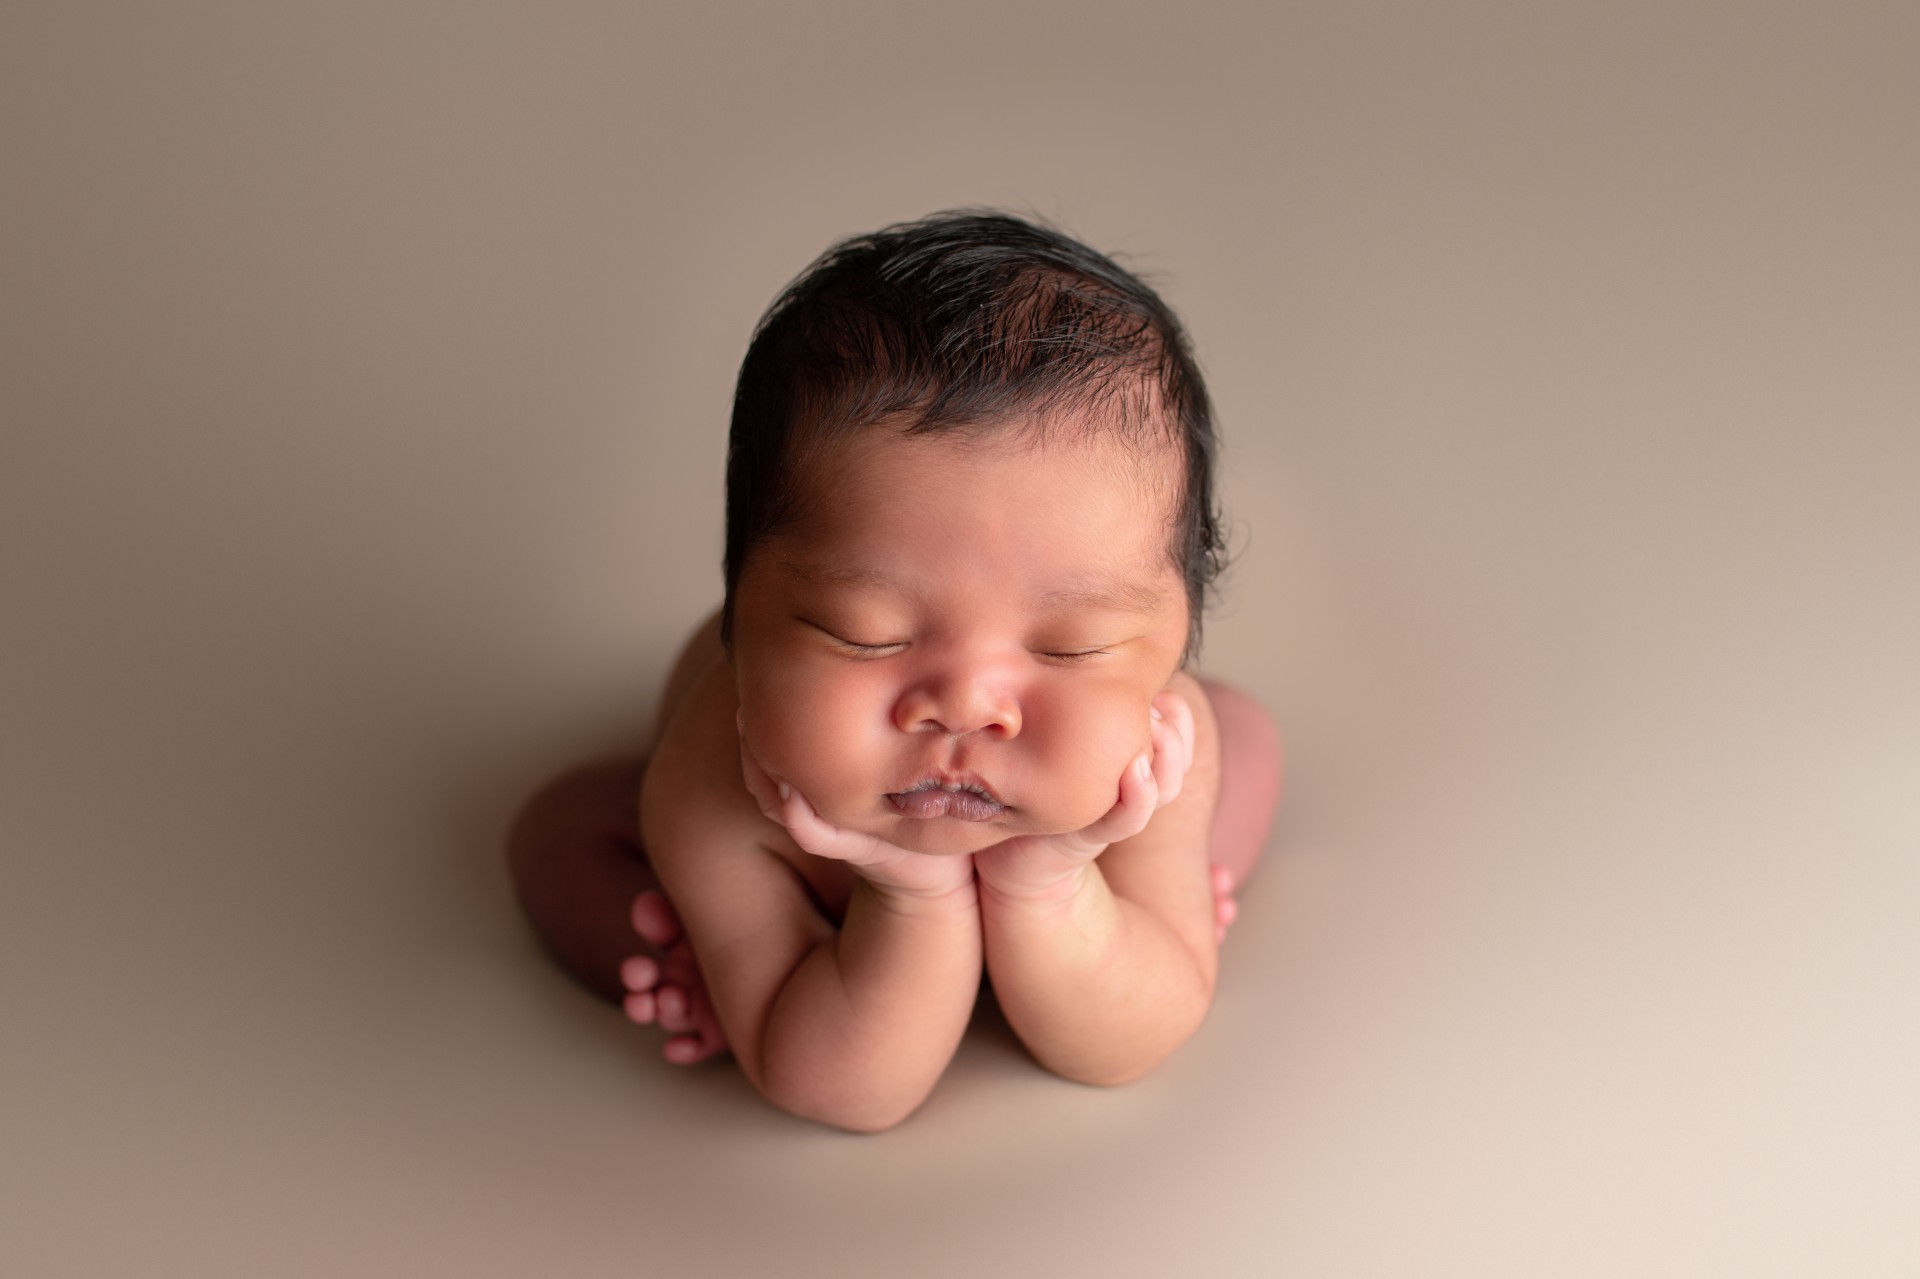 baby with dark hair is sleeping in the newborn froggy pose